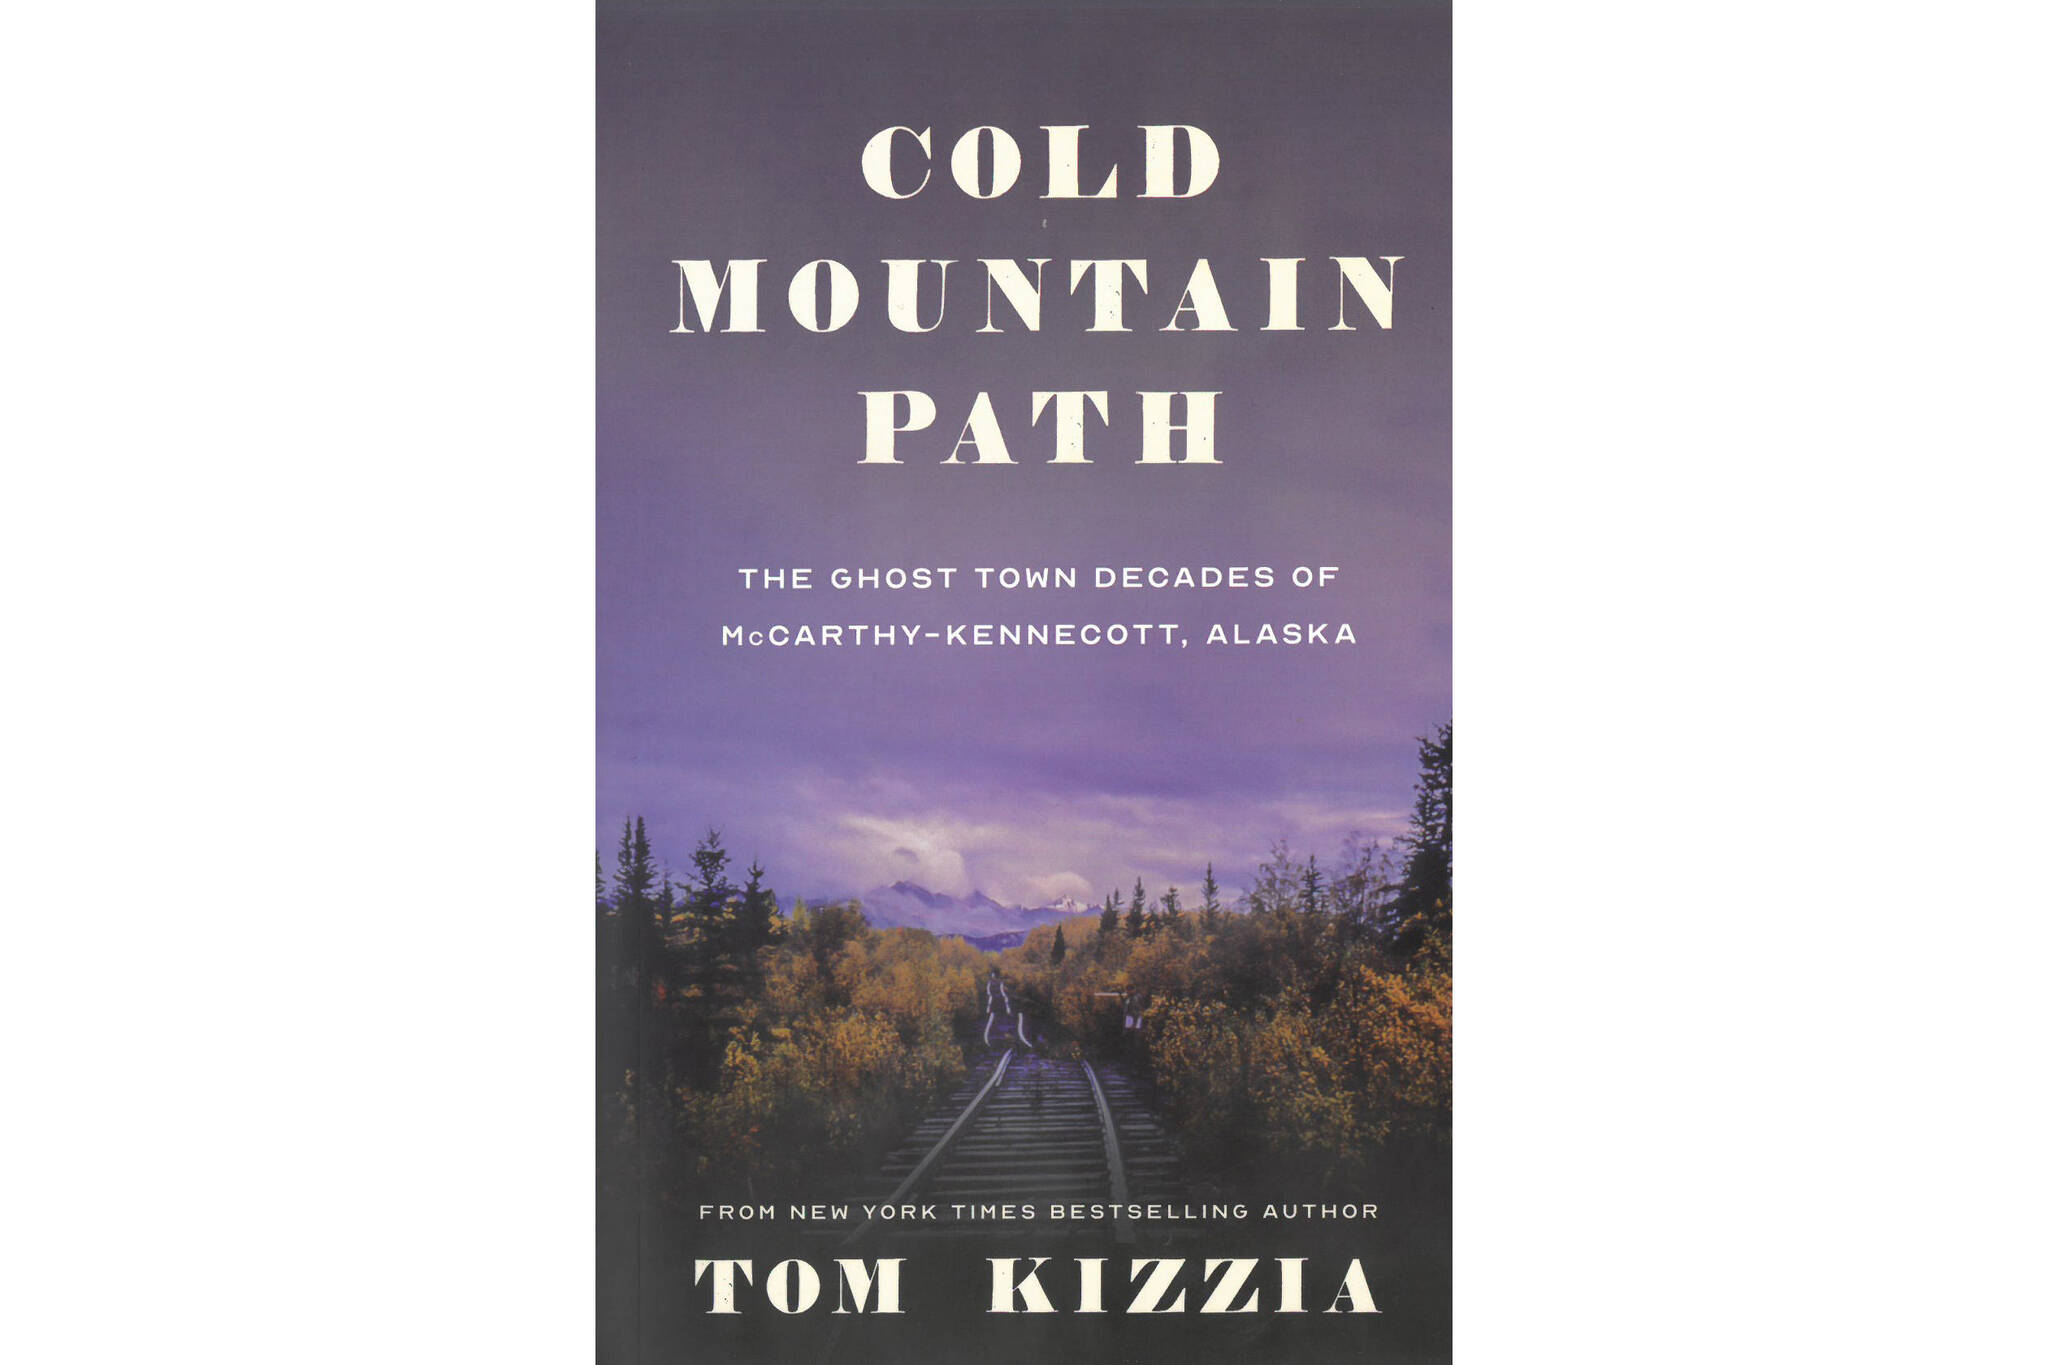 The cover of Tom Kizzia's book, "Cold Mountain Path," published by Porphyry Press in October 2021. (Photo provided)